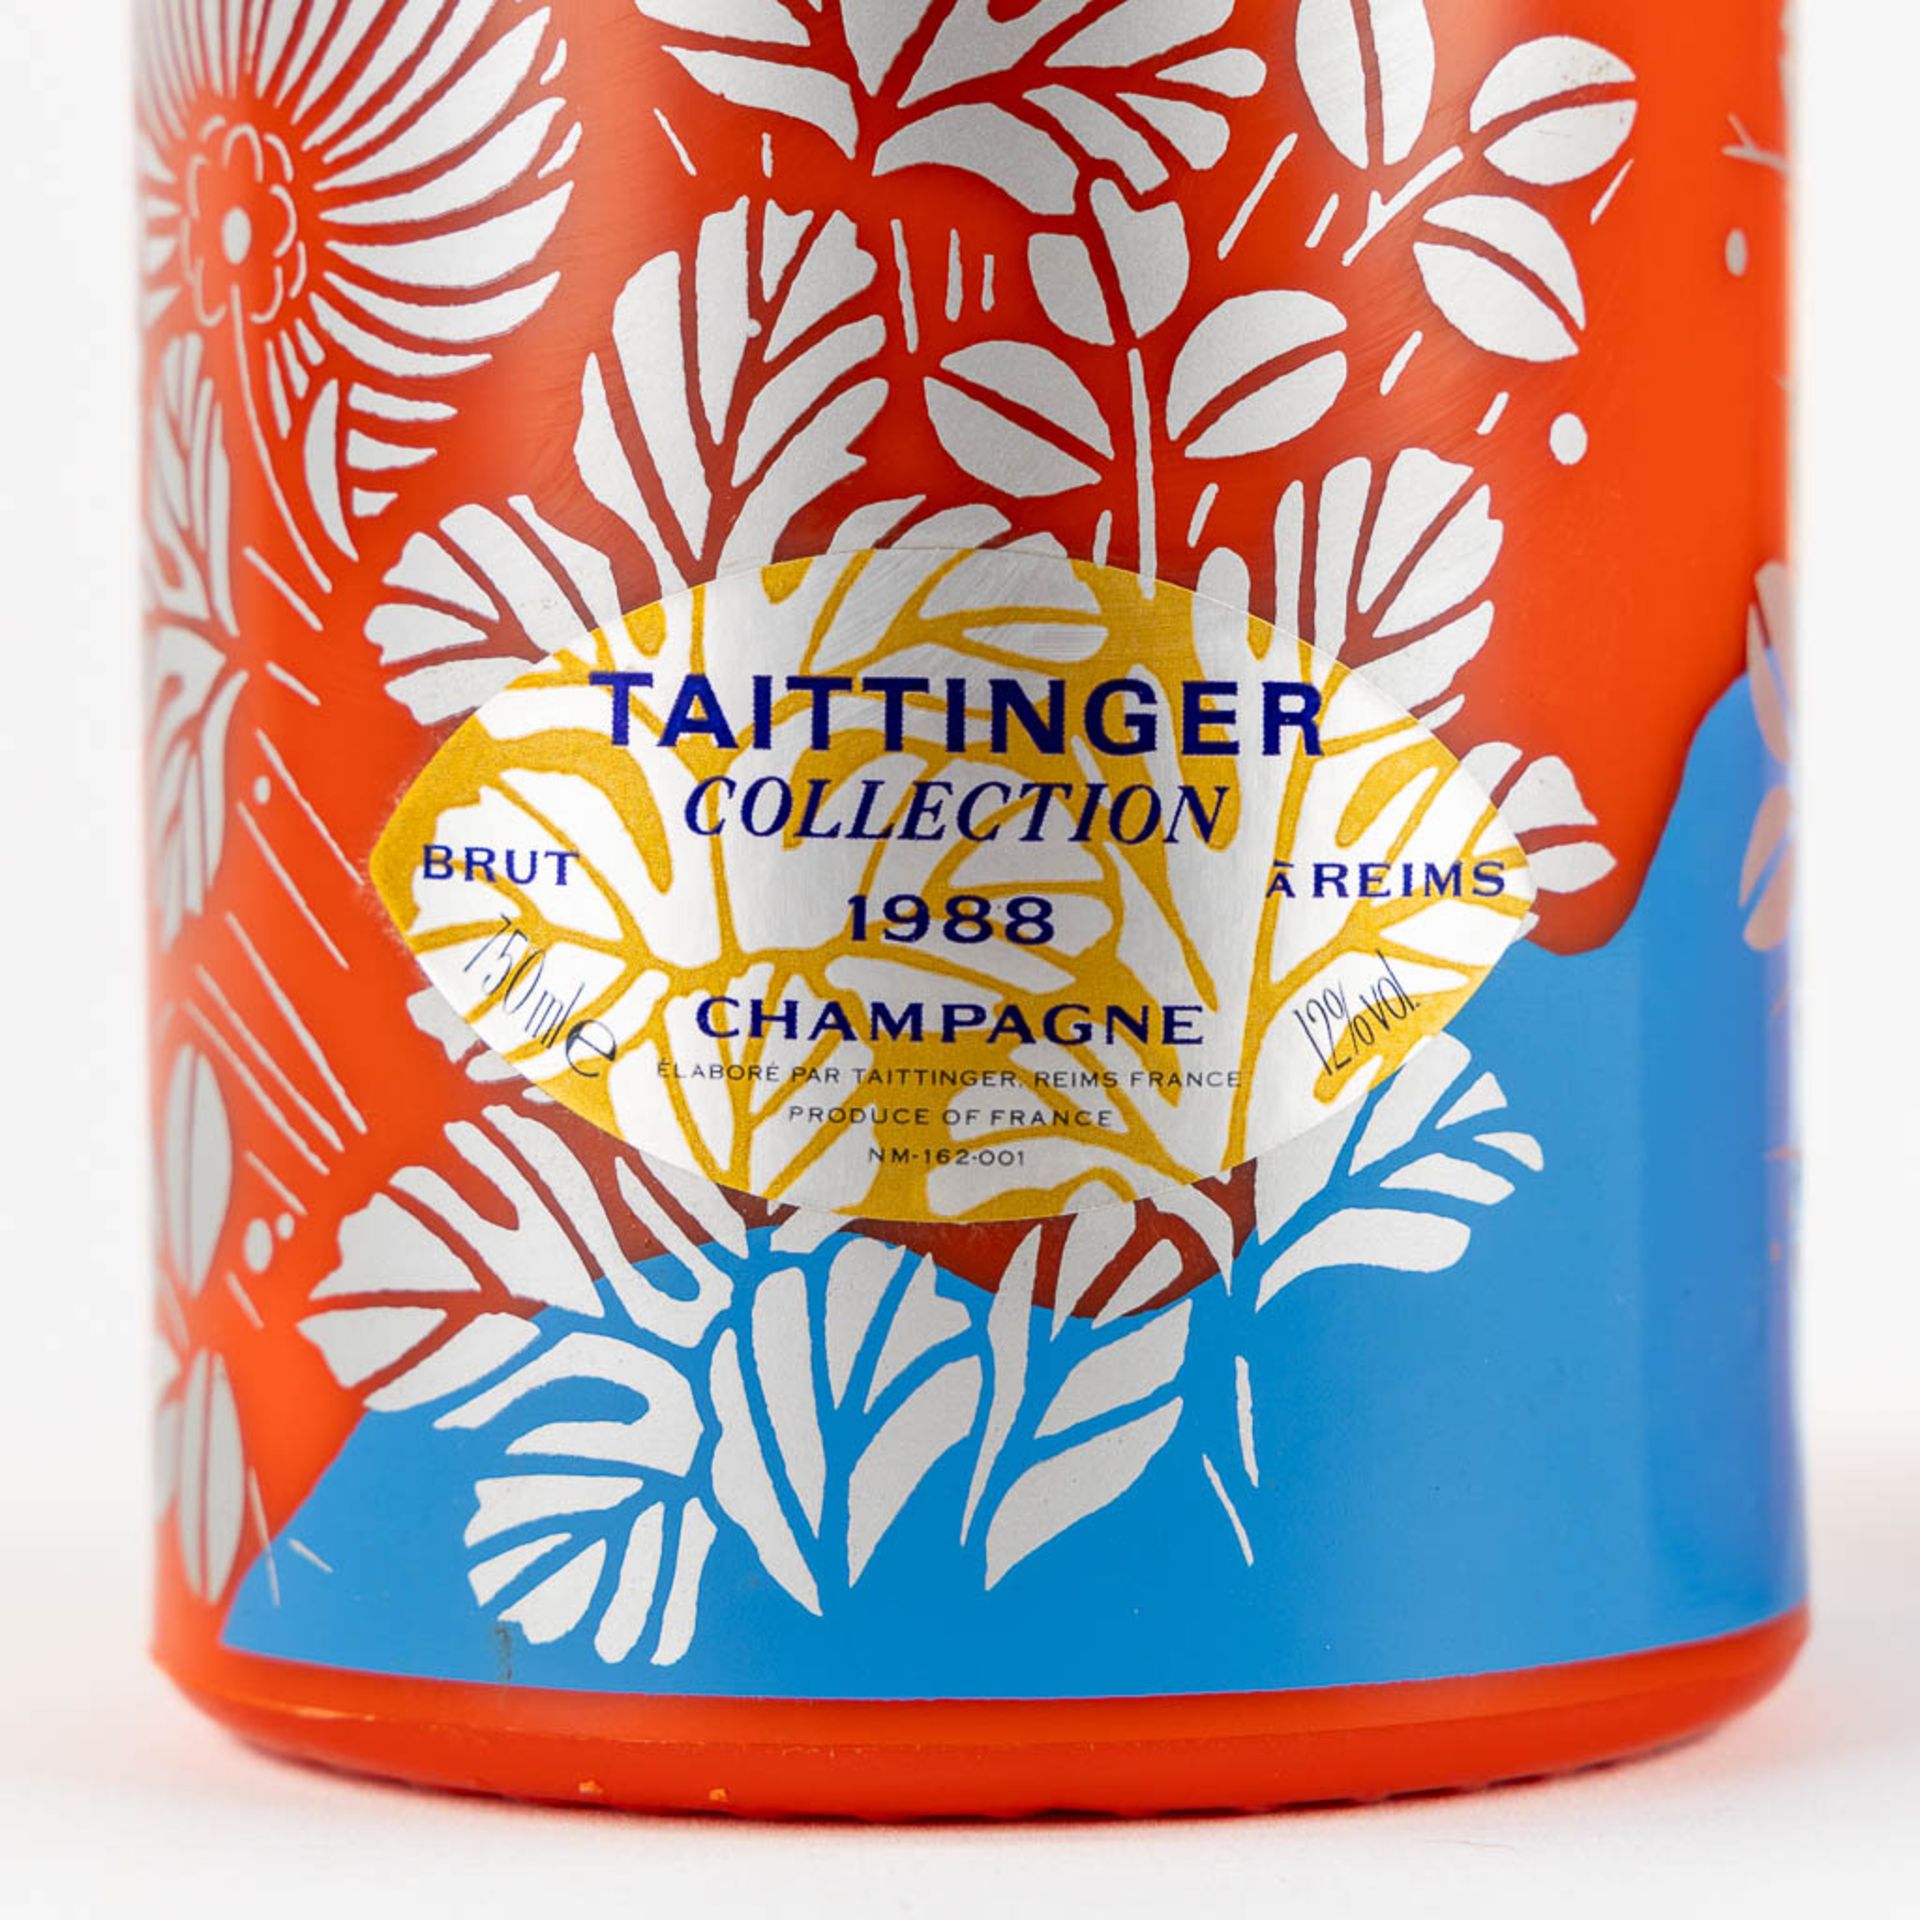 1988 Taittinger Collection Imaî, Champagne - Image 2 of 3